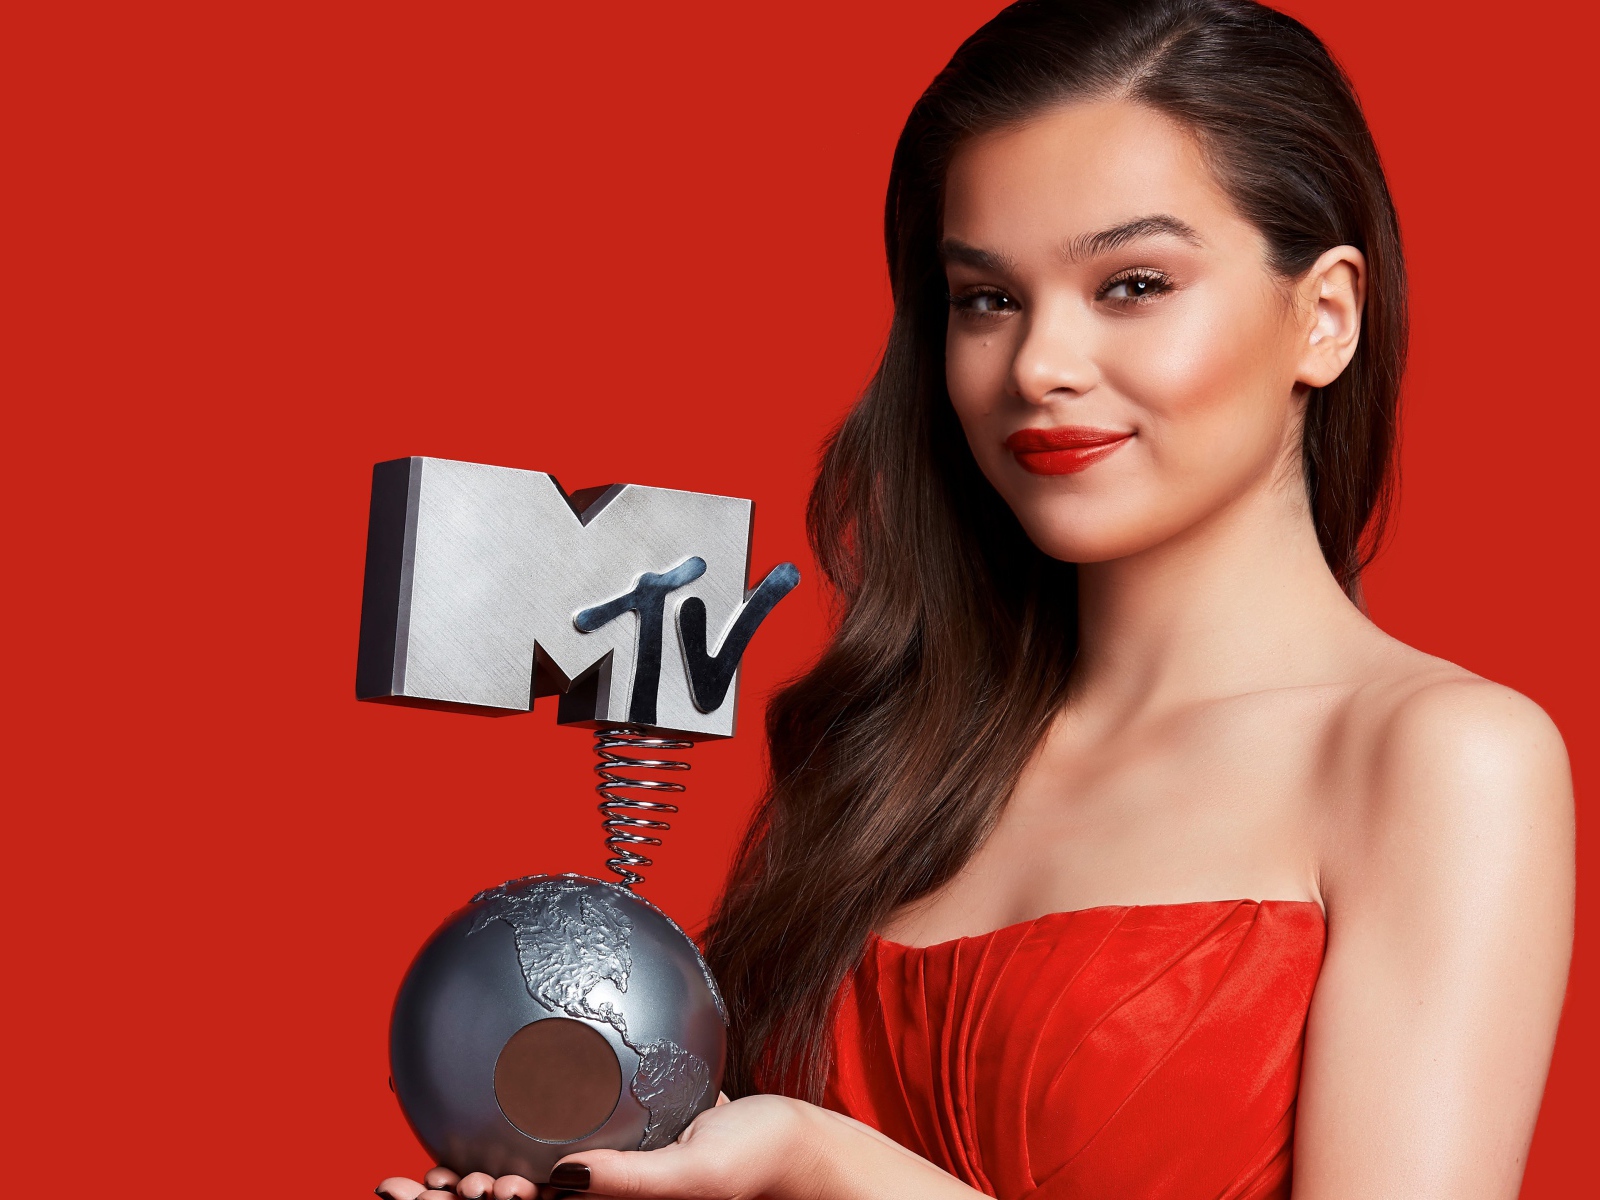 Haley Stainfield with MTV Award on Red Background